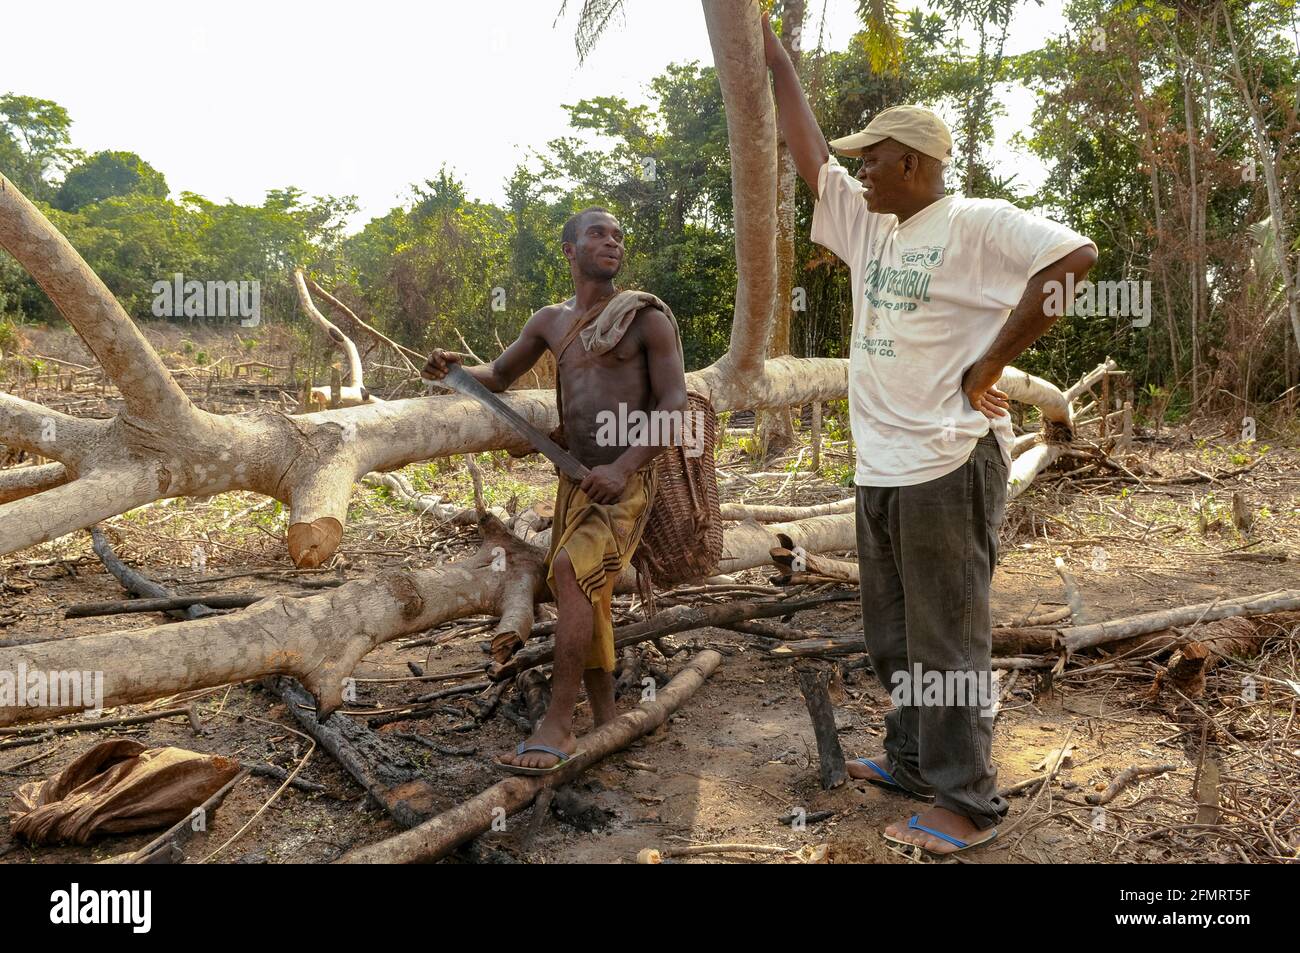 Farmer talking to Liberian conservationist about the tropical forest he has just cleared to make a living, illustrating how complex conservation is. Stock Photo